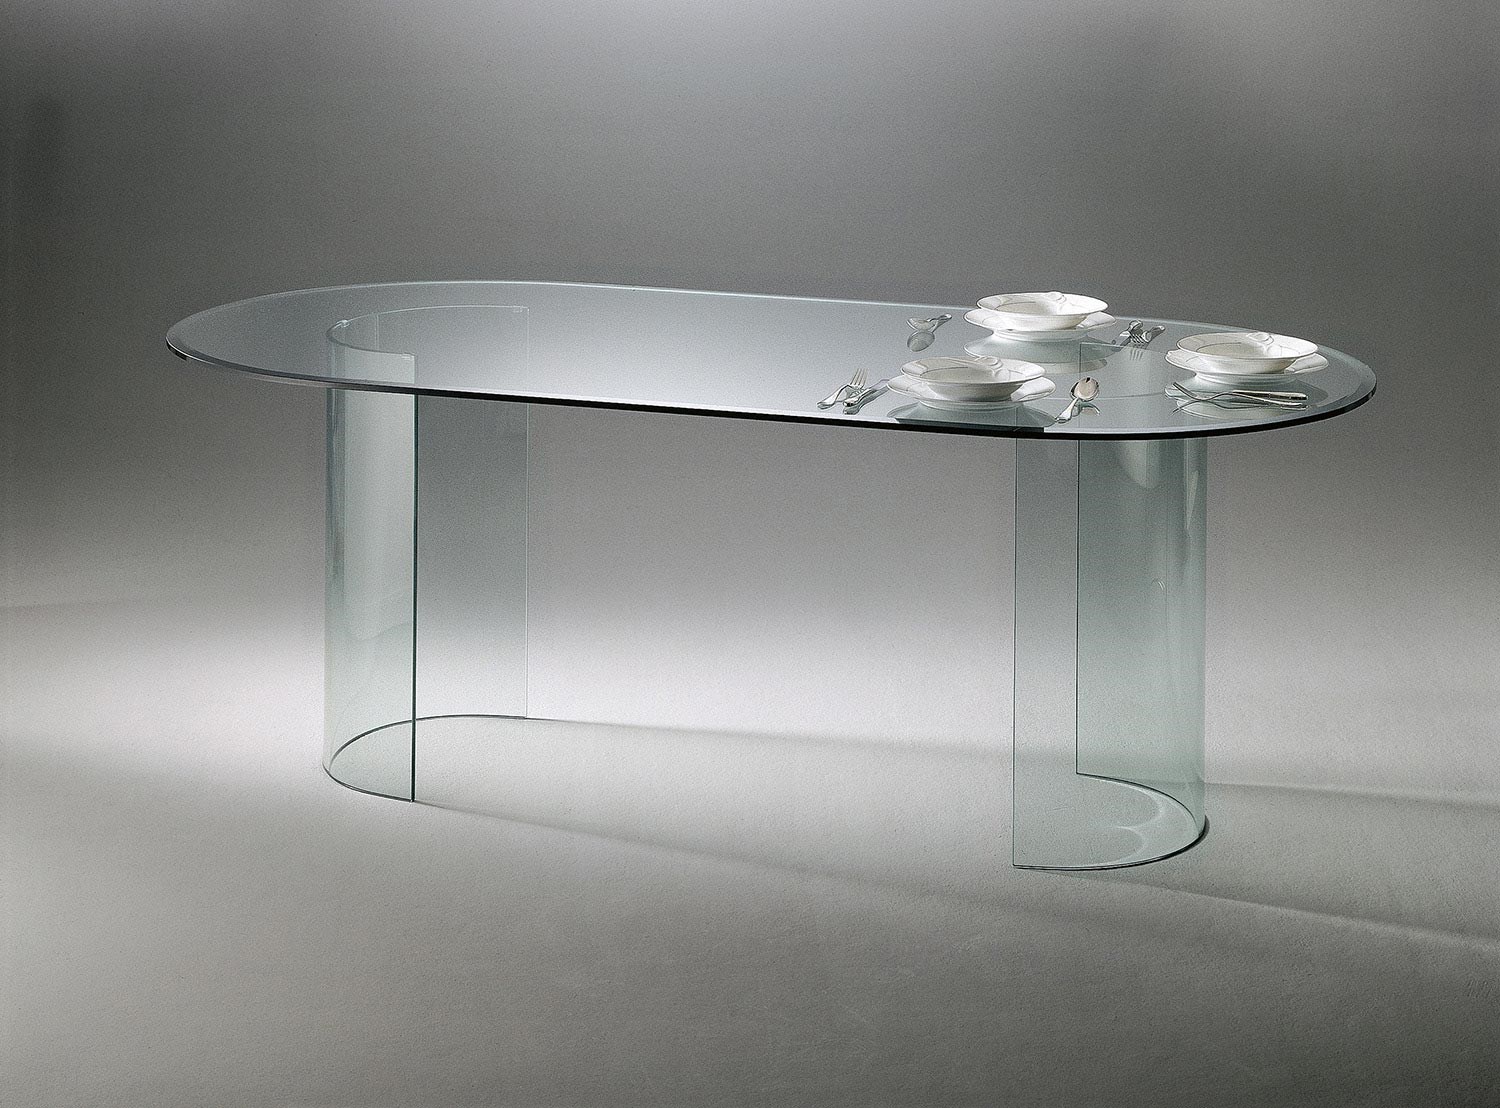 Glass dining table GK 28 by DREIECK DESIGN: FLOATGLASS - with facet